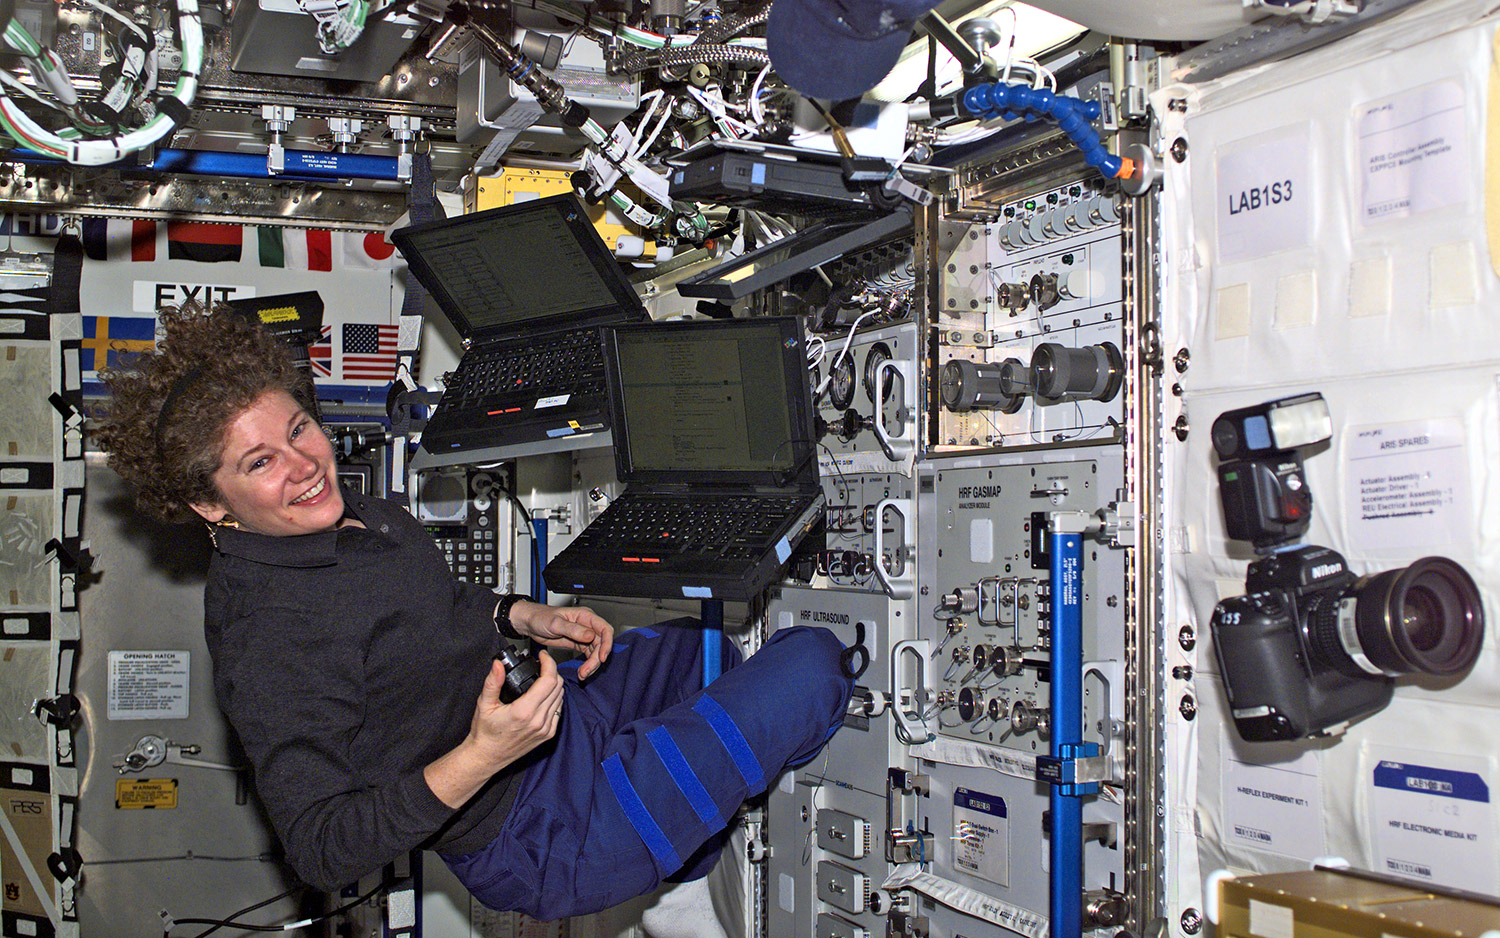 The first female member of an International Space Station crew was NASA astronaut Susan Helms, who served as a flight engineer during the Expedition 2 mission from March to August 2001. It was just the second mission of the fledgling space laboratory.